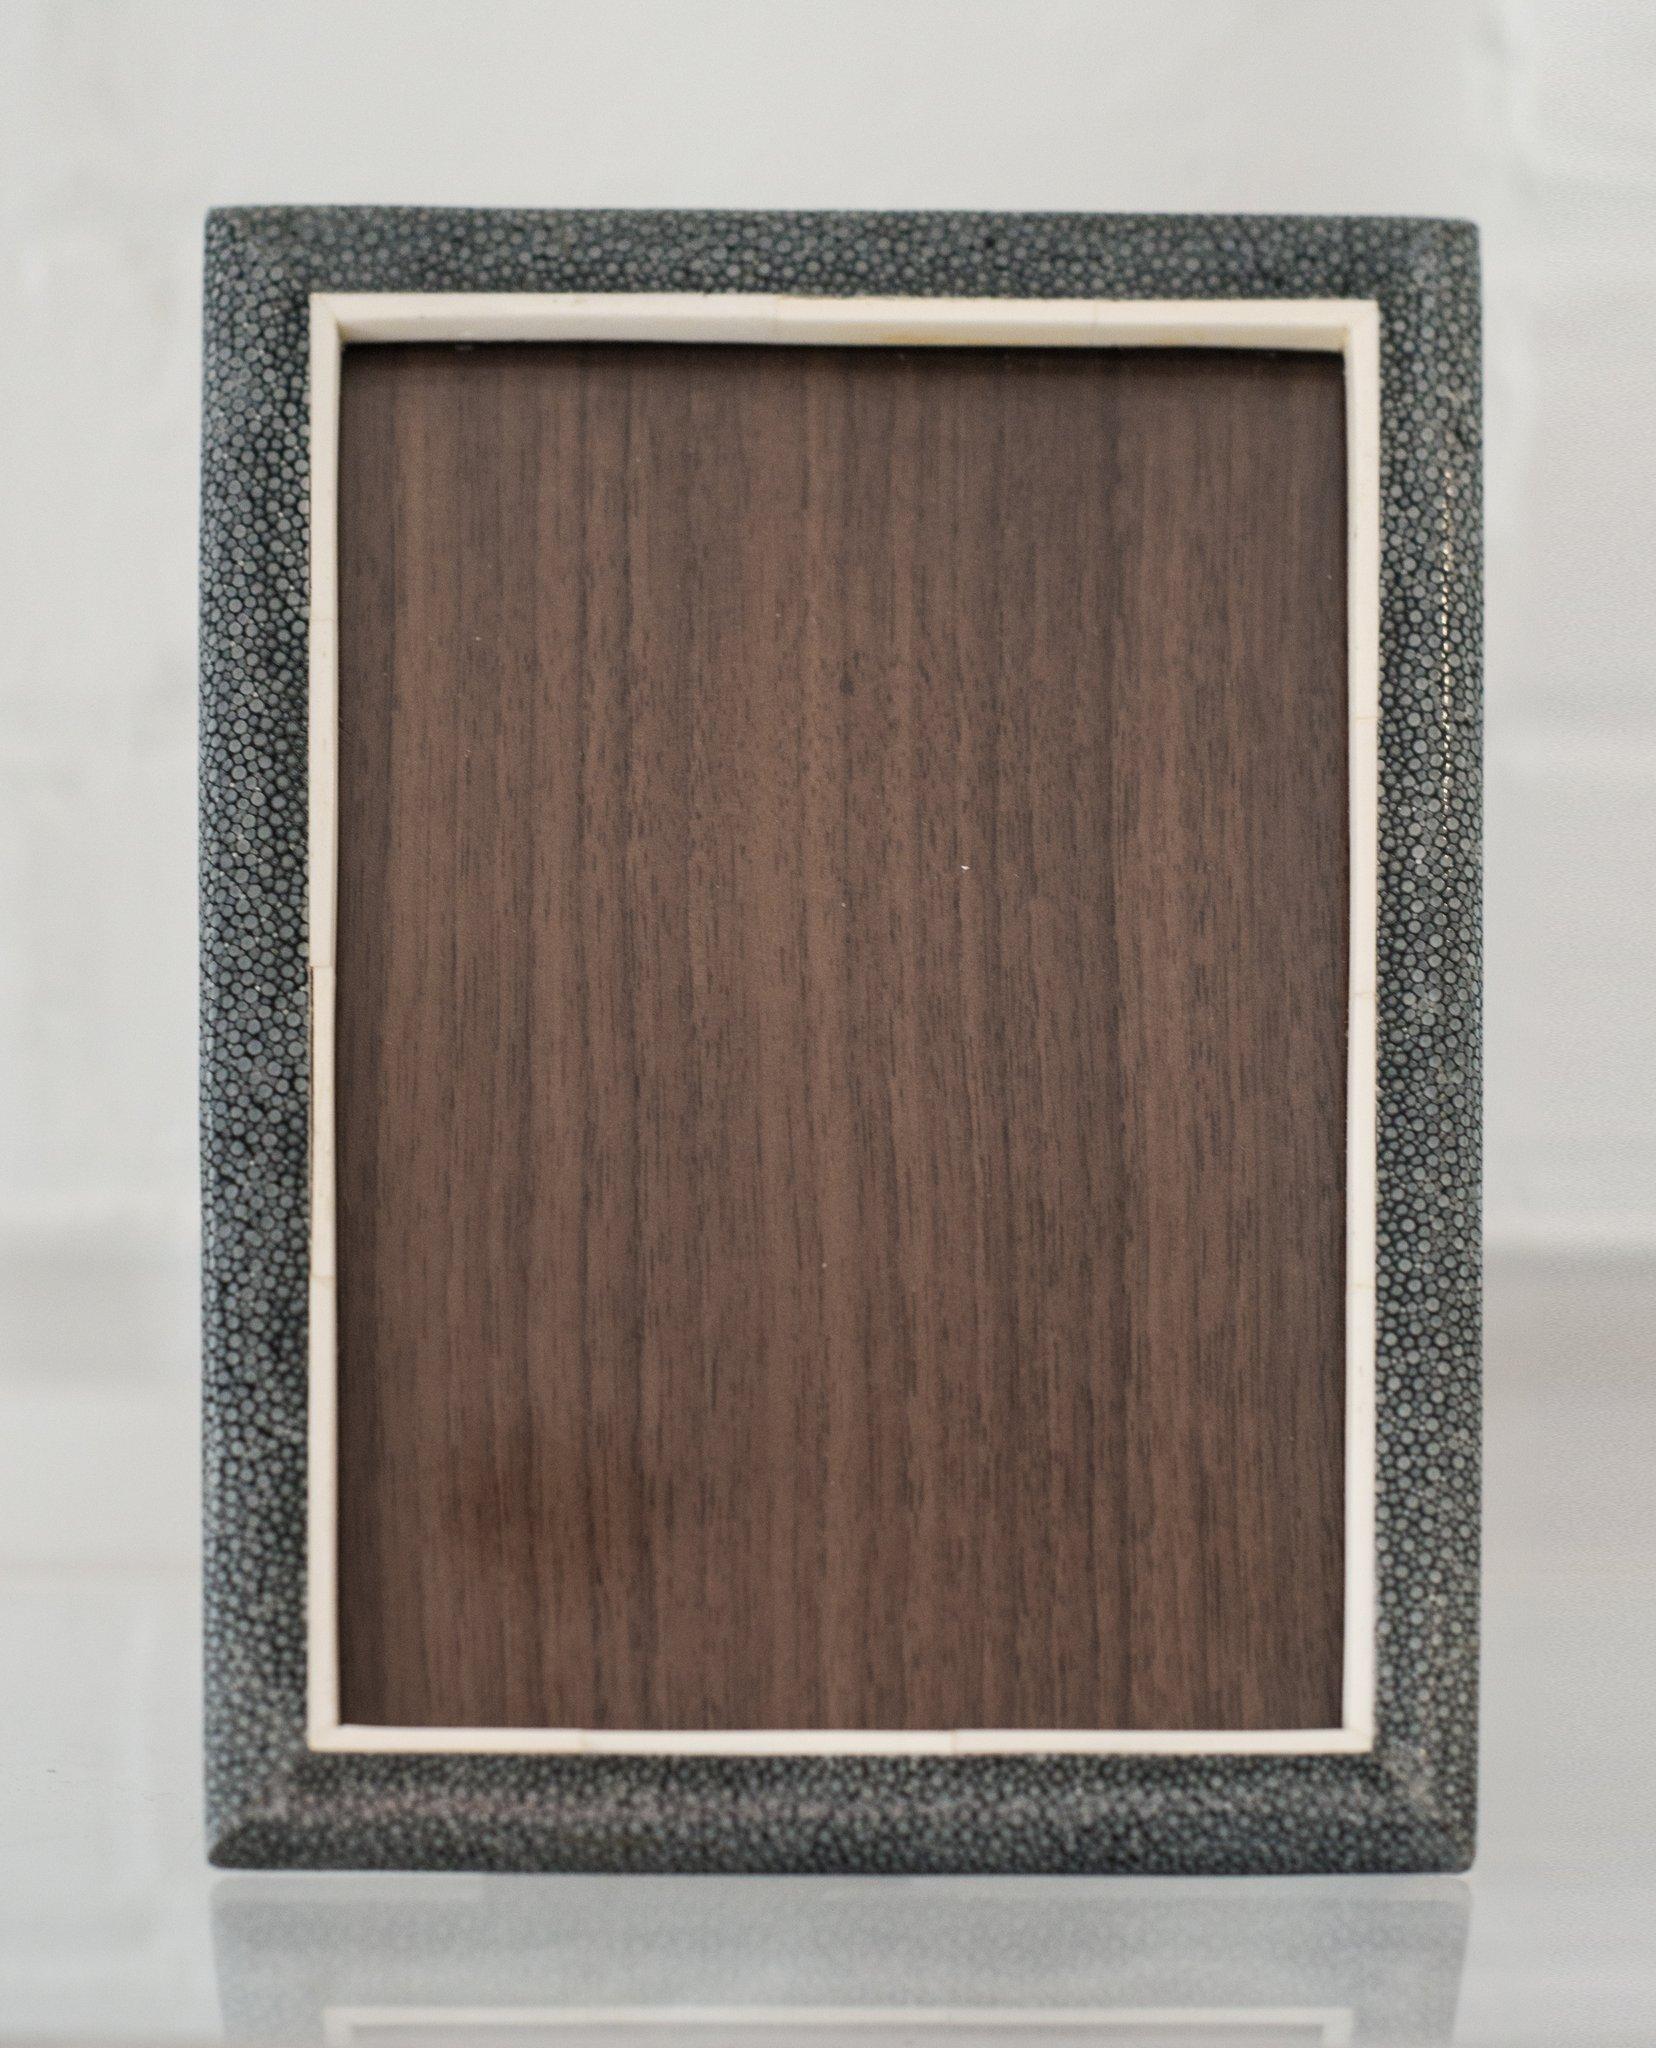 A small picture frame in blue/black Shagreen, bone and walnut. Accommodates one 5 x 7